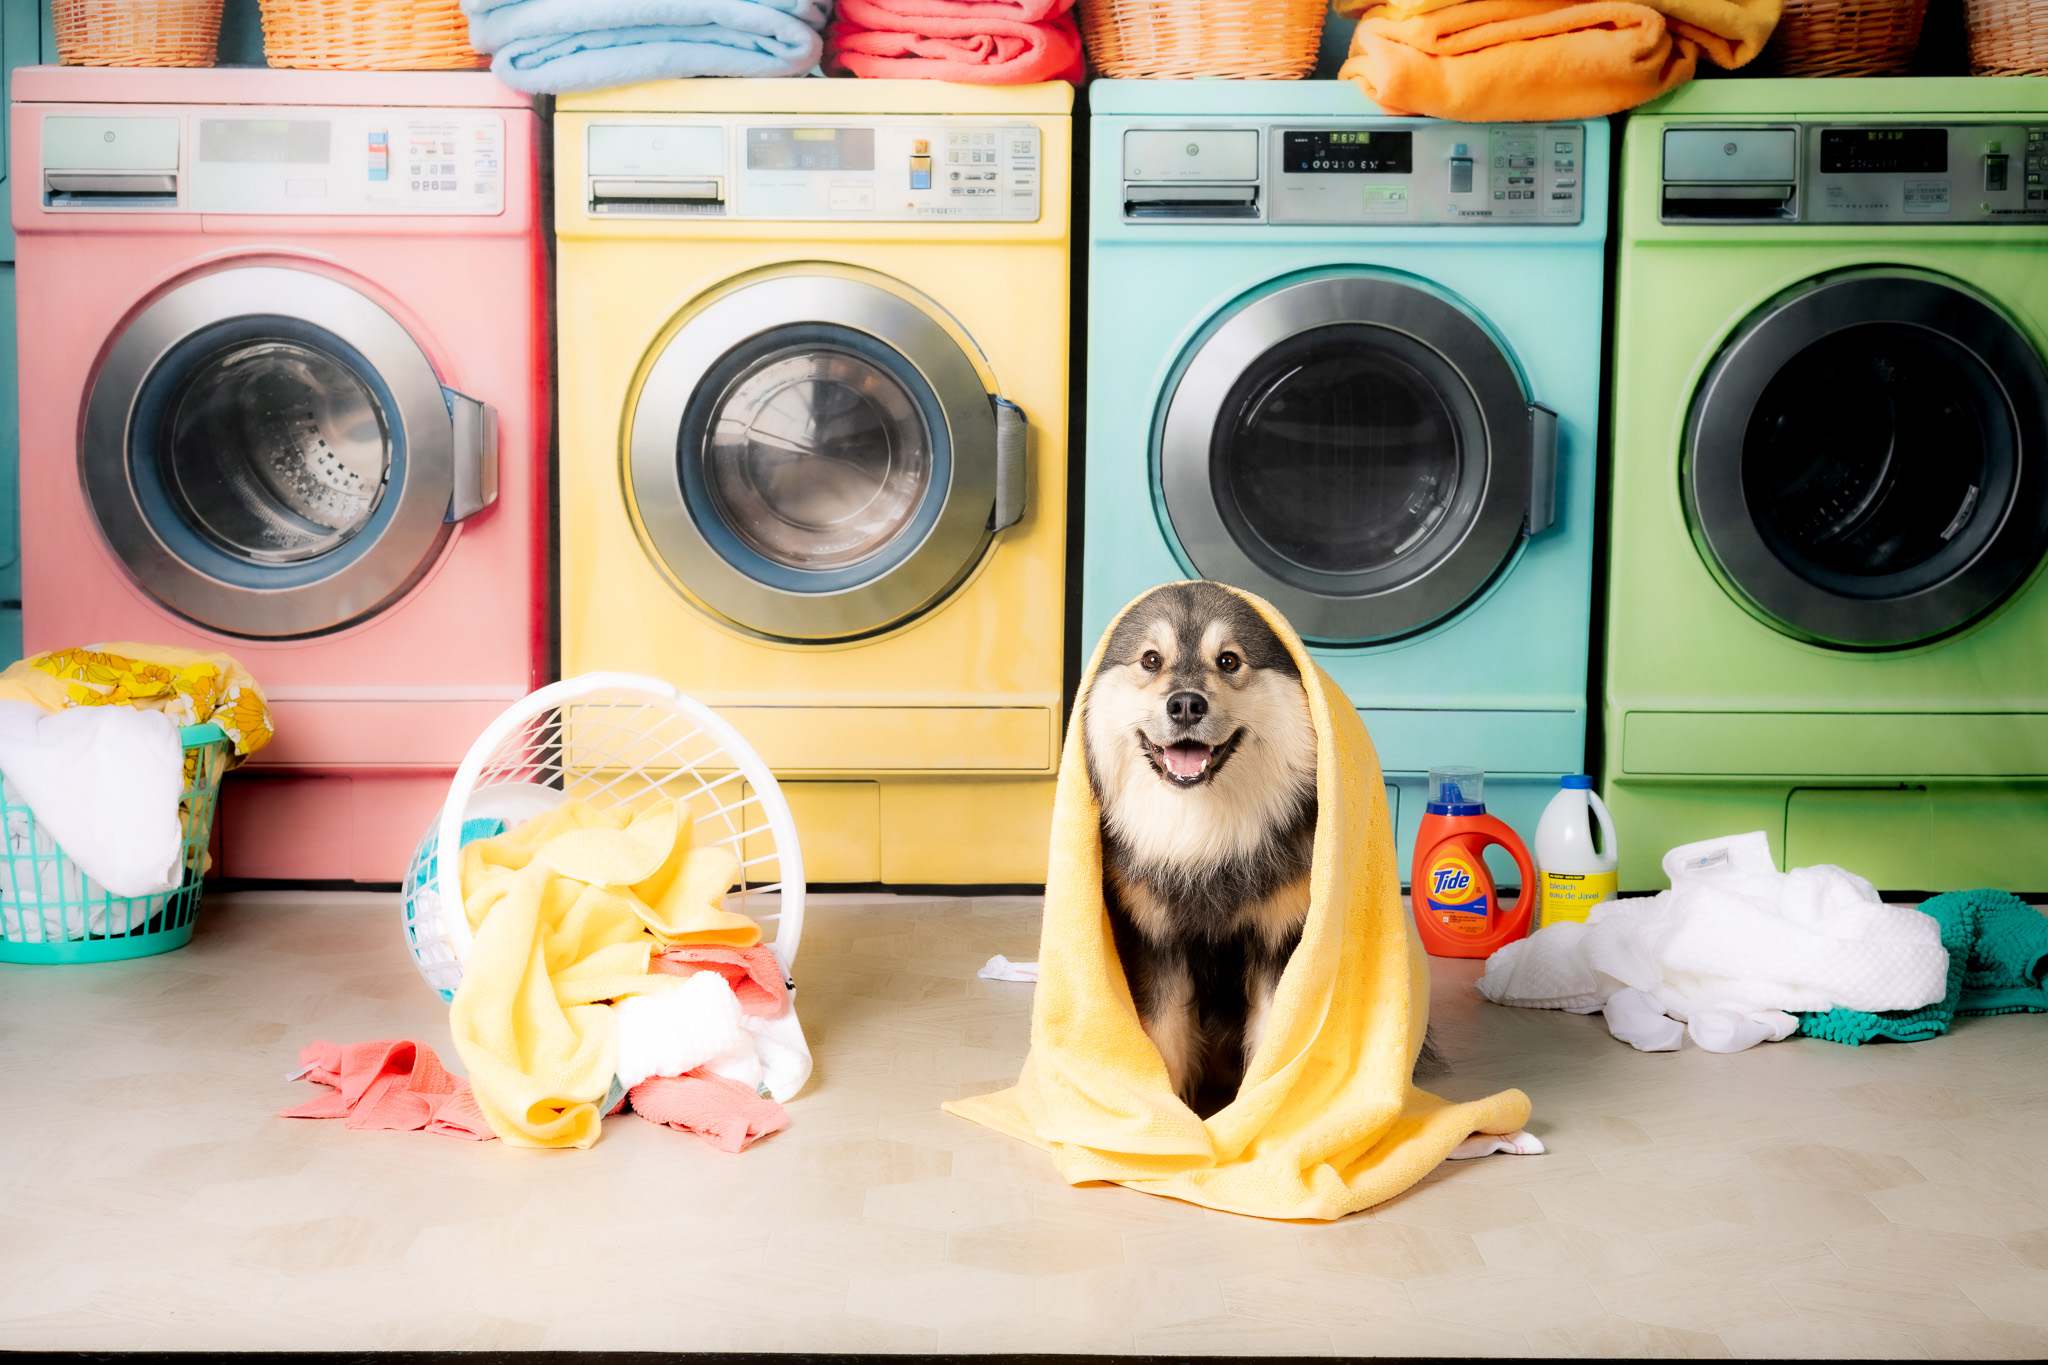 Dog in blanket squatting in front of washing machine backdrop